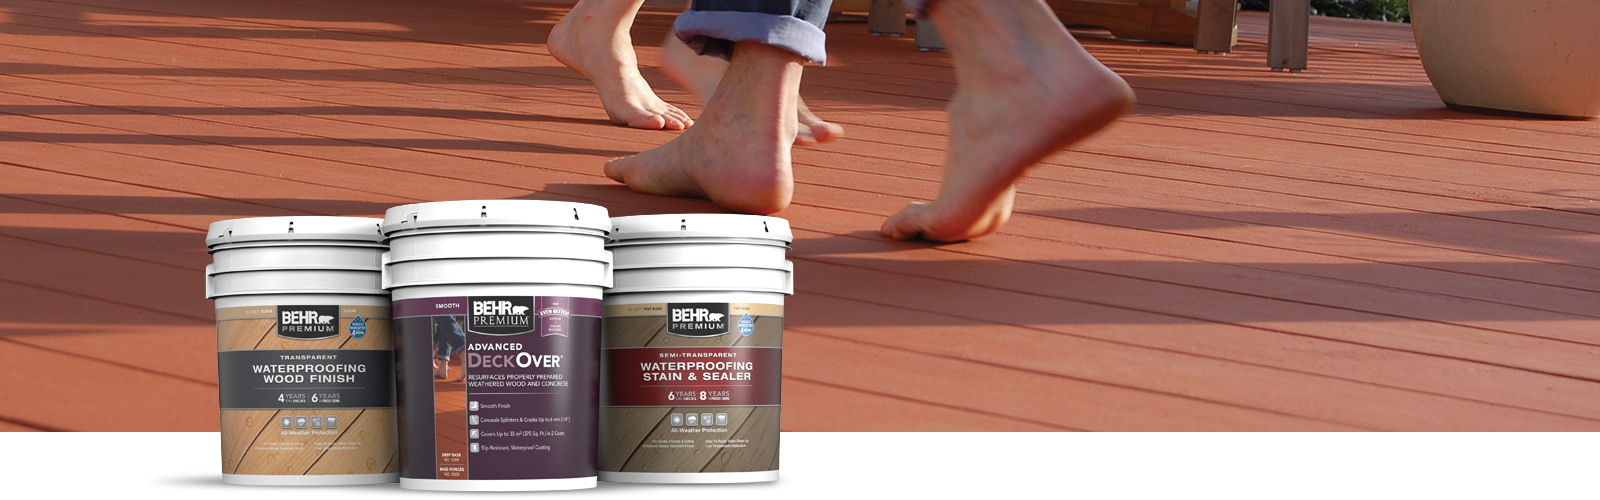 Behr Pro exterior stain products landing page desktop image.